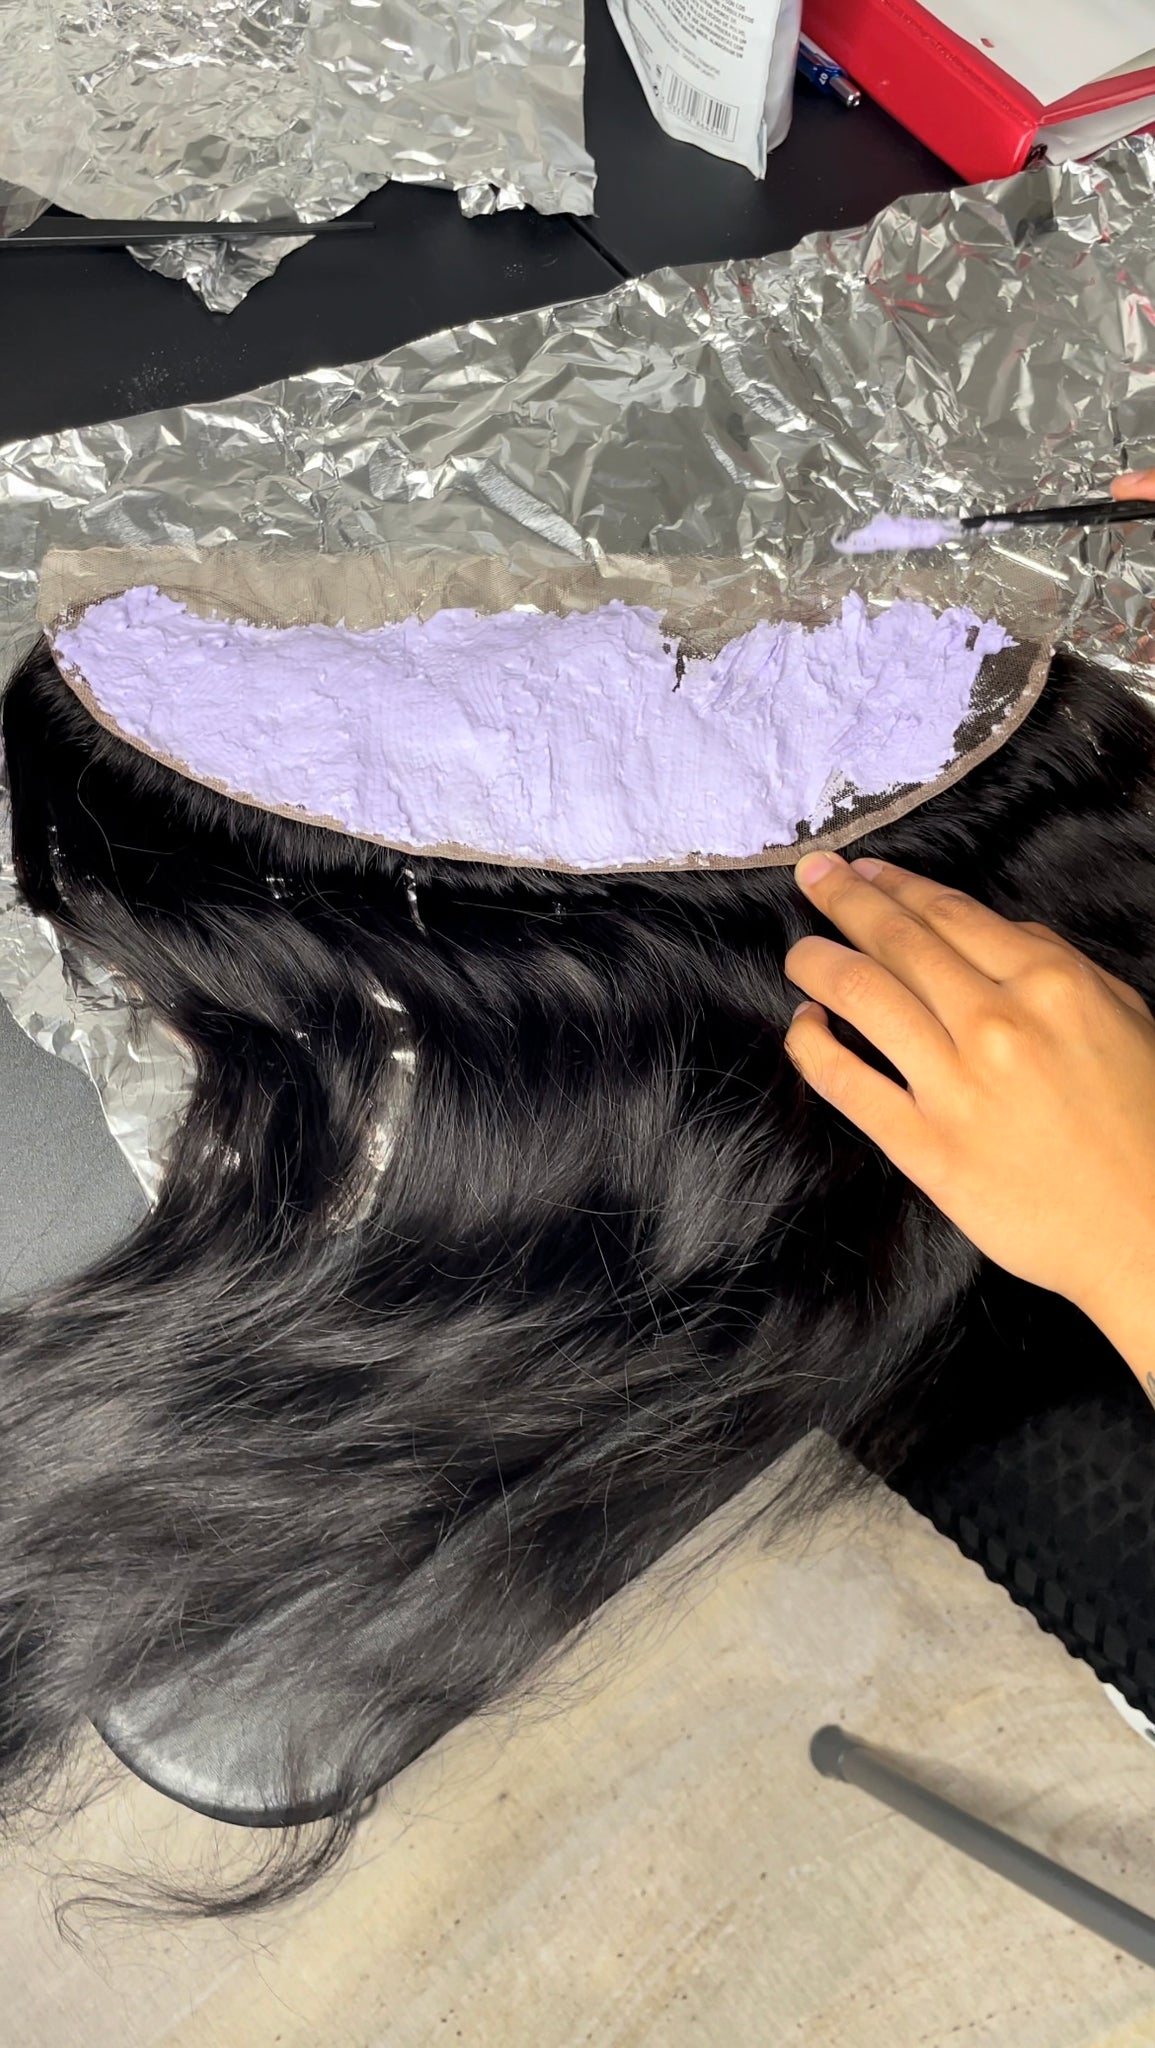 1 on 1 Wig Making Class – Fabluxurious